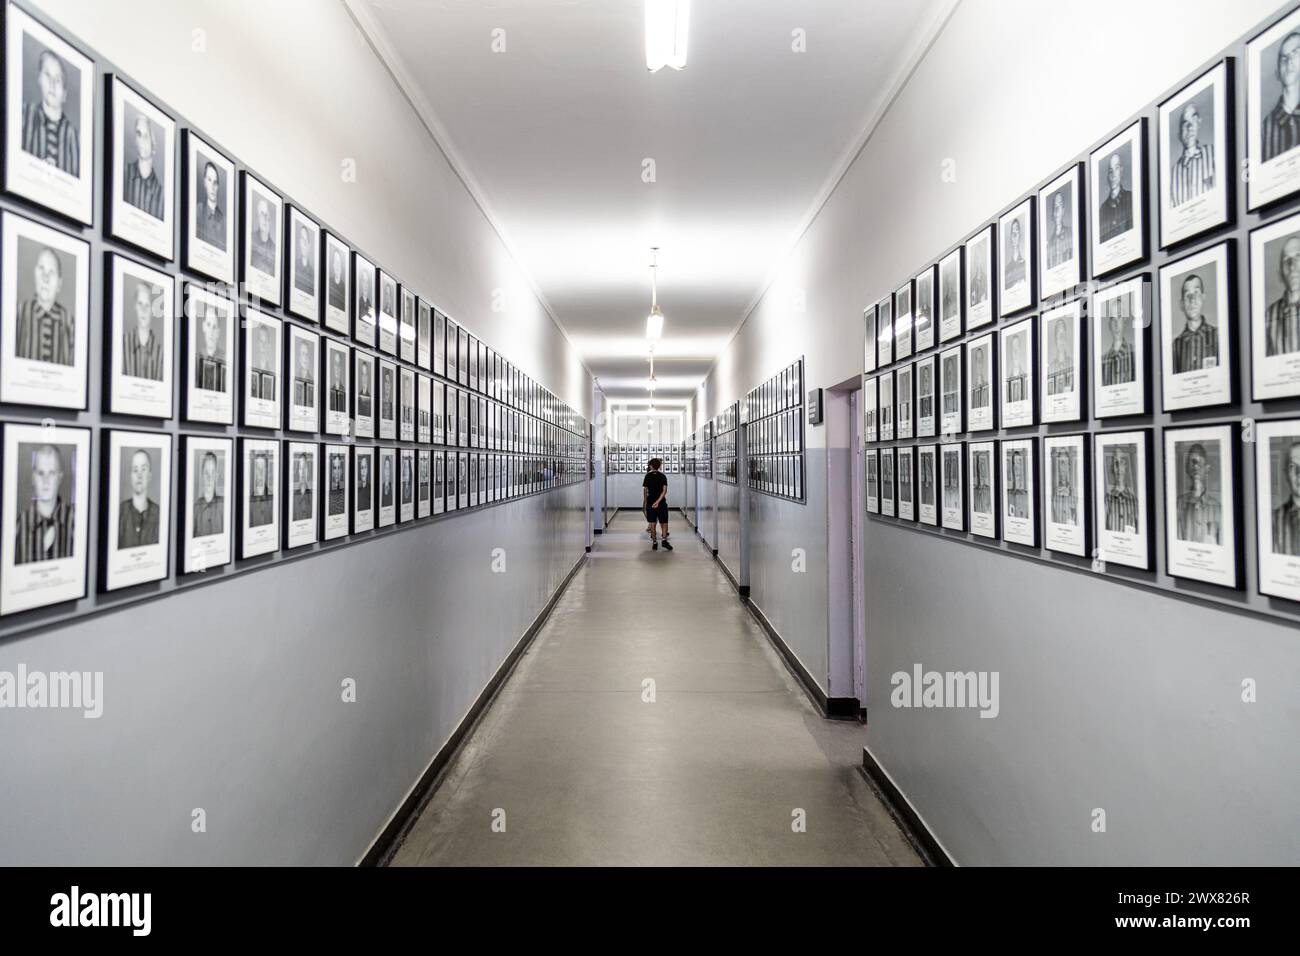 Exhibition of photos of prisoners at the Auschwitz I concentration camp museum, Poland Stock Photo